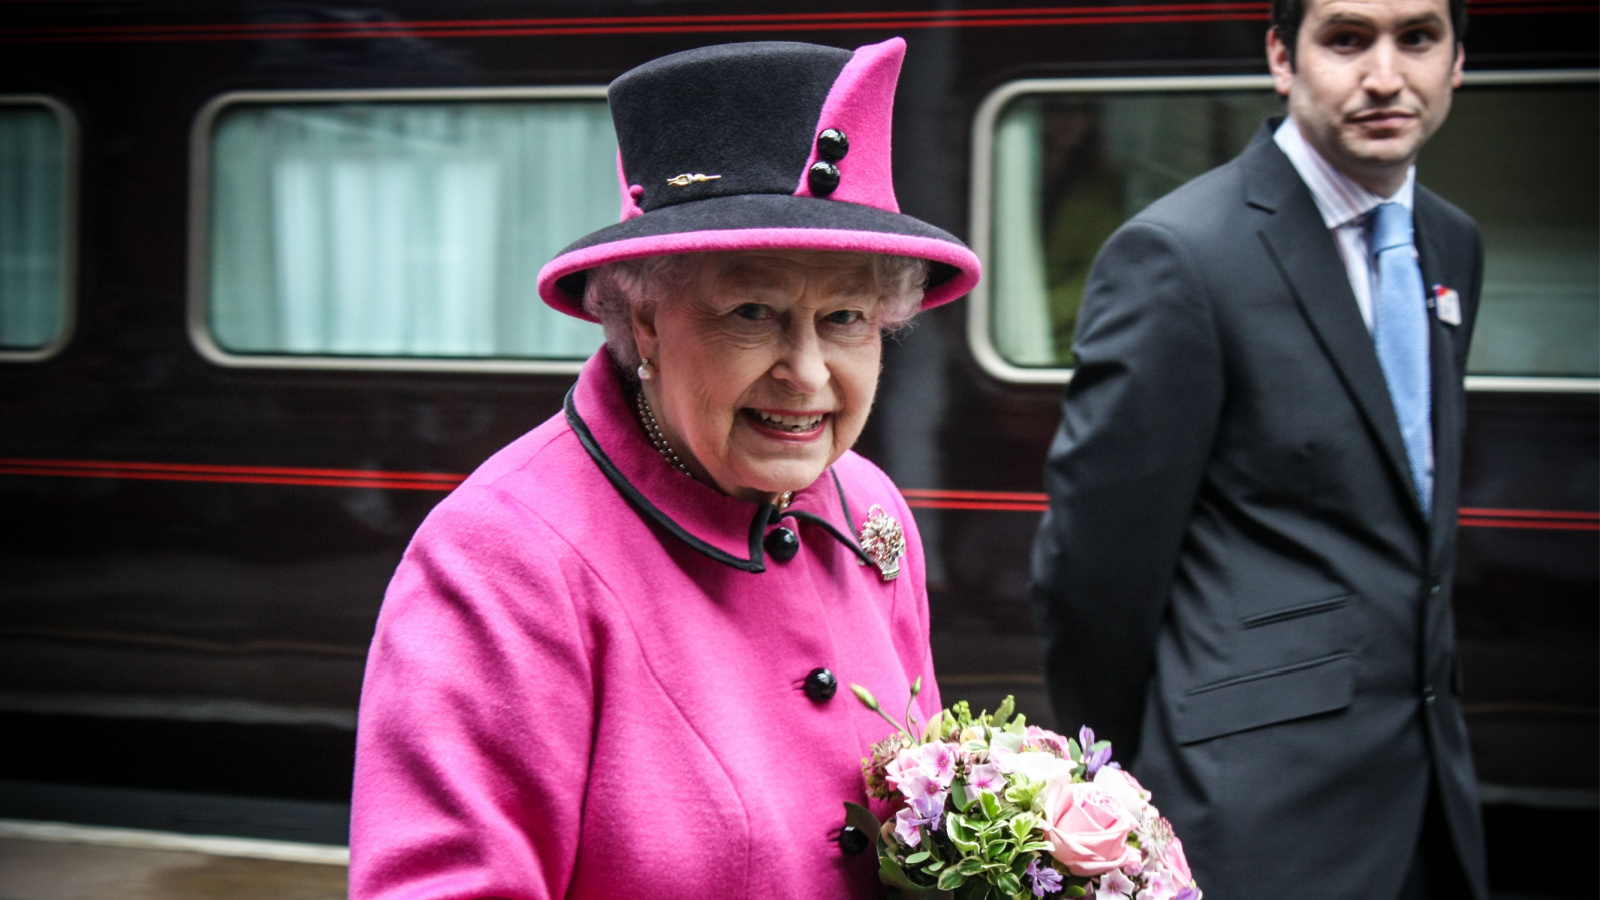 image credit: Simon-Ward-Photography/Shutterstock <p><span>In 2020, during a global crisis, Queen Elizabeth II delivered a rare televised address. She offered words of comfort and solidarity, invoking the resilient spirit of past generations. Her calm and reassuring presence provided a sense of stability in uncertain times. This speech is remembered for its empathetic tone and message of unity.</span></p>